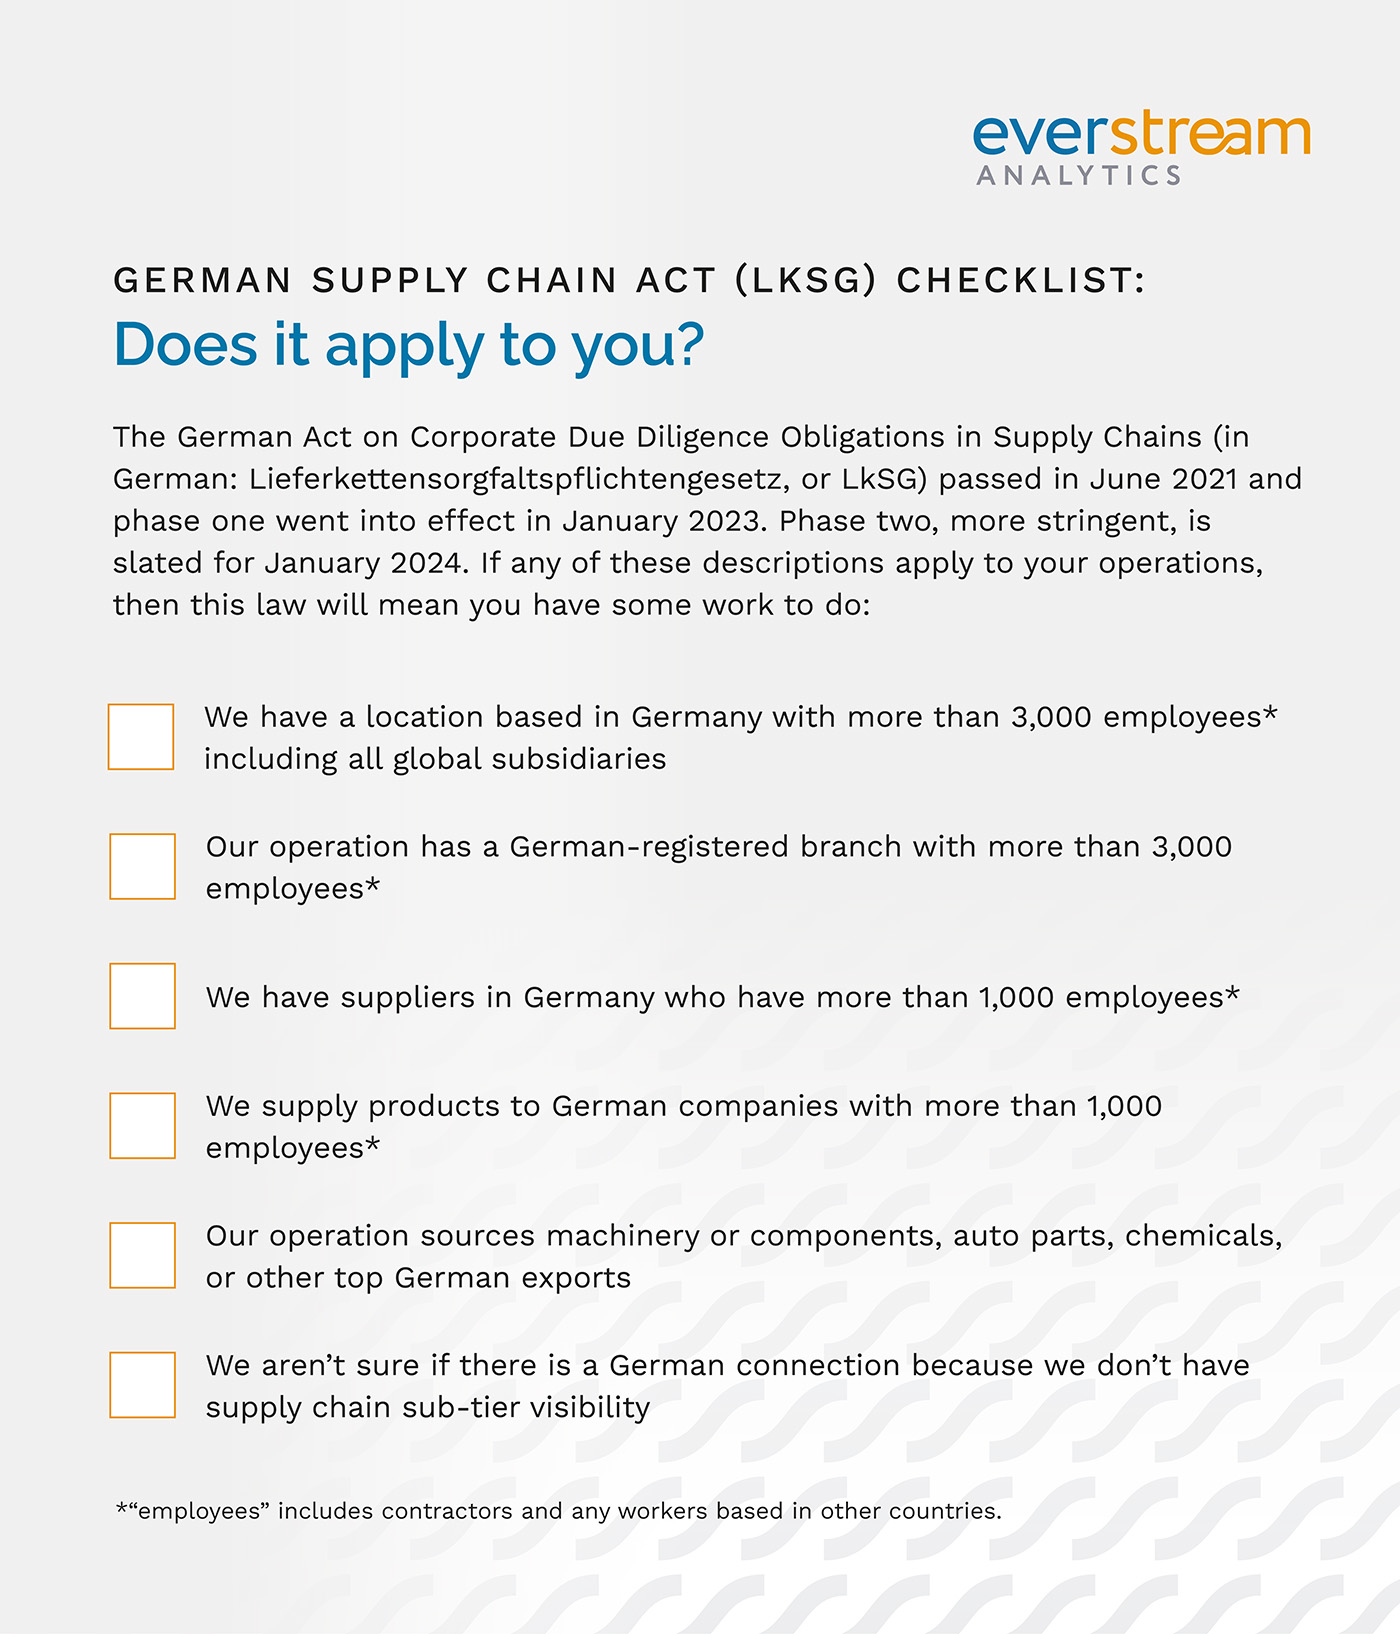 checklist of questions about German supply chain act or LkSG